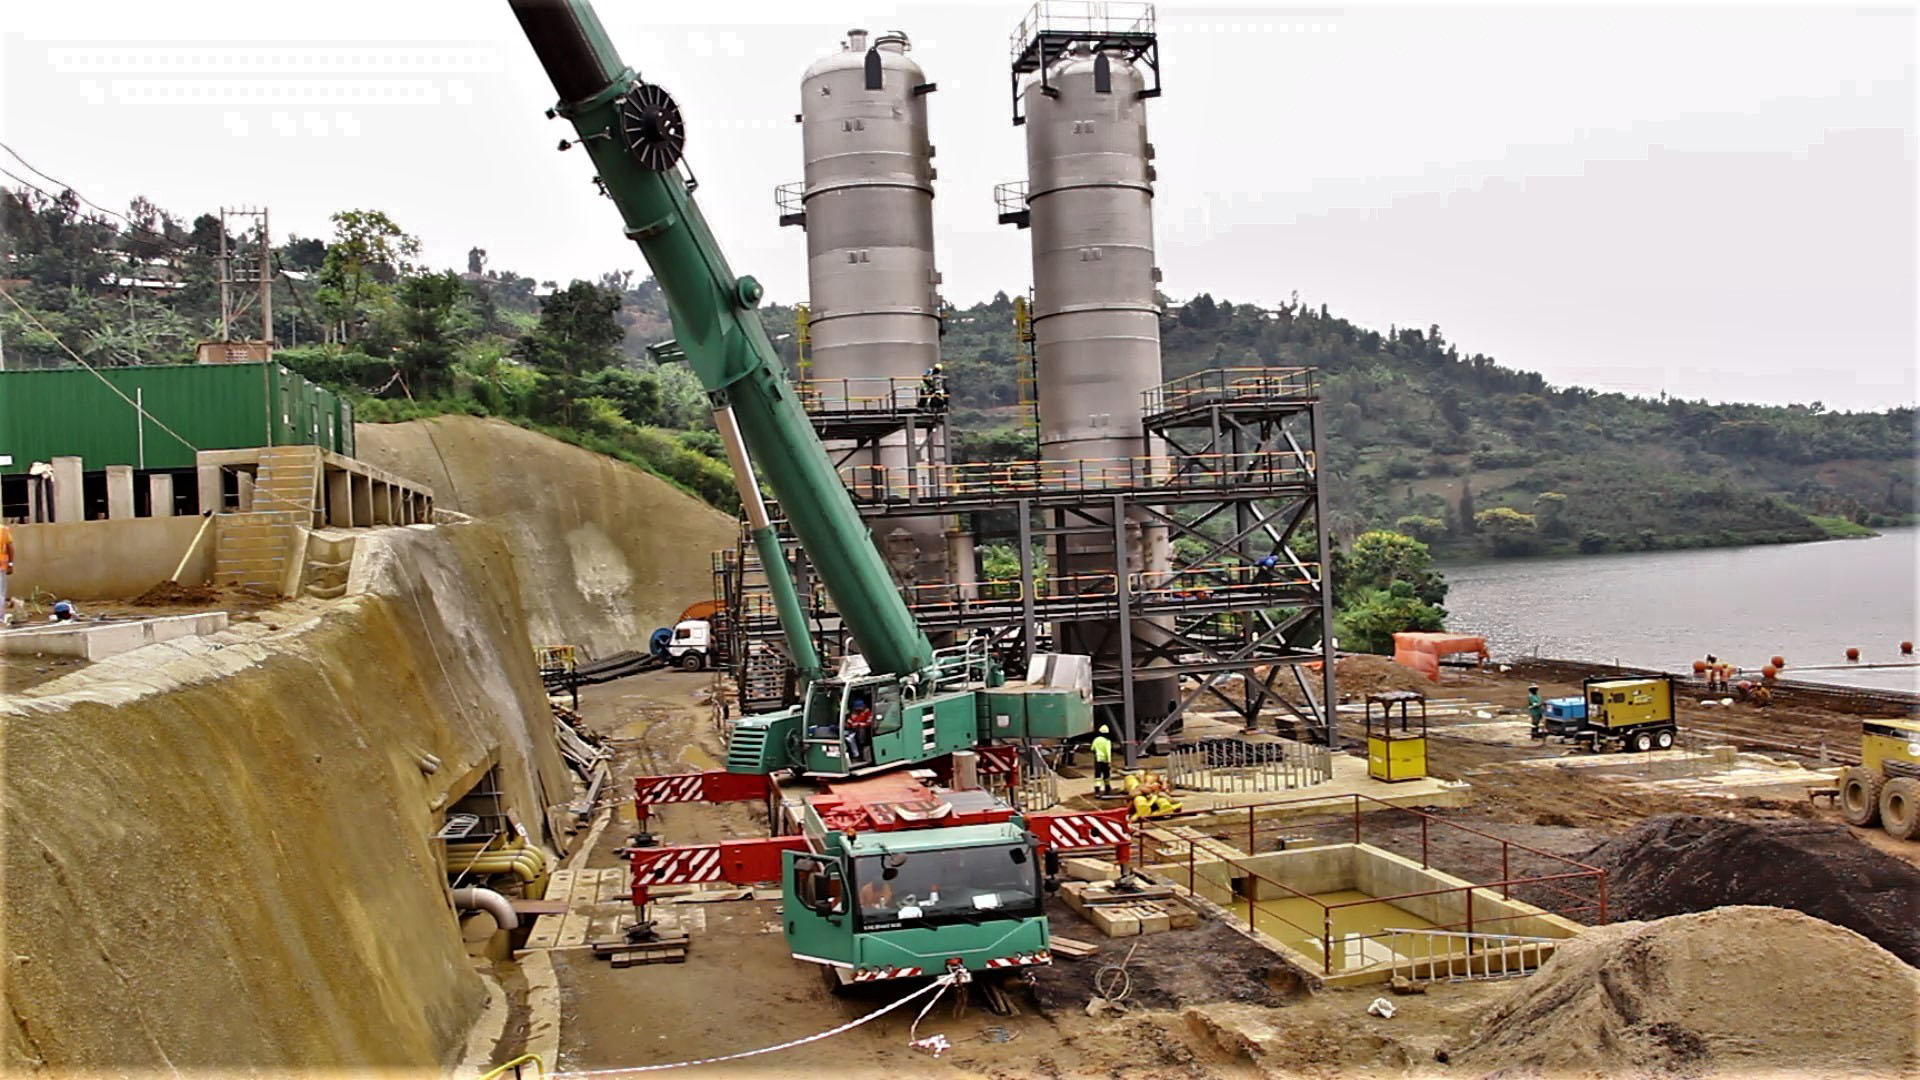 A multi-million dollar methane gas extraction project on lake Kivu. Rwanda is set to carry out a feasibility study for domestic urea production from Lake Kivu methane gas. Photo: File.